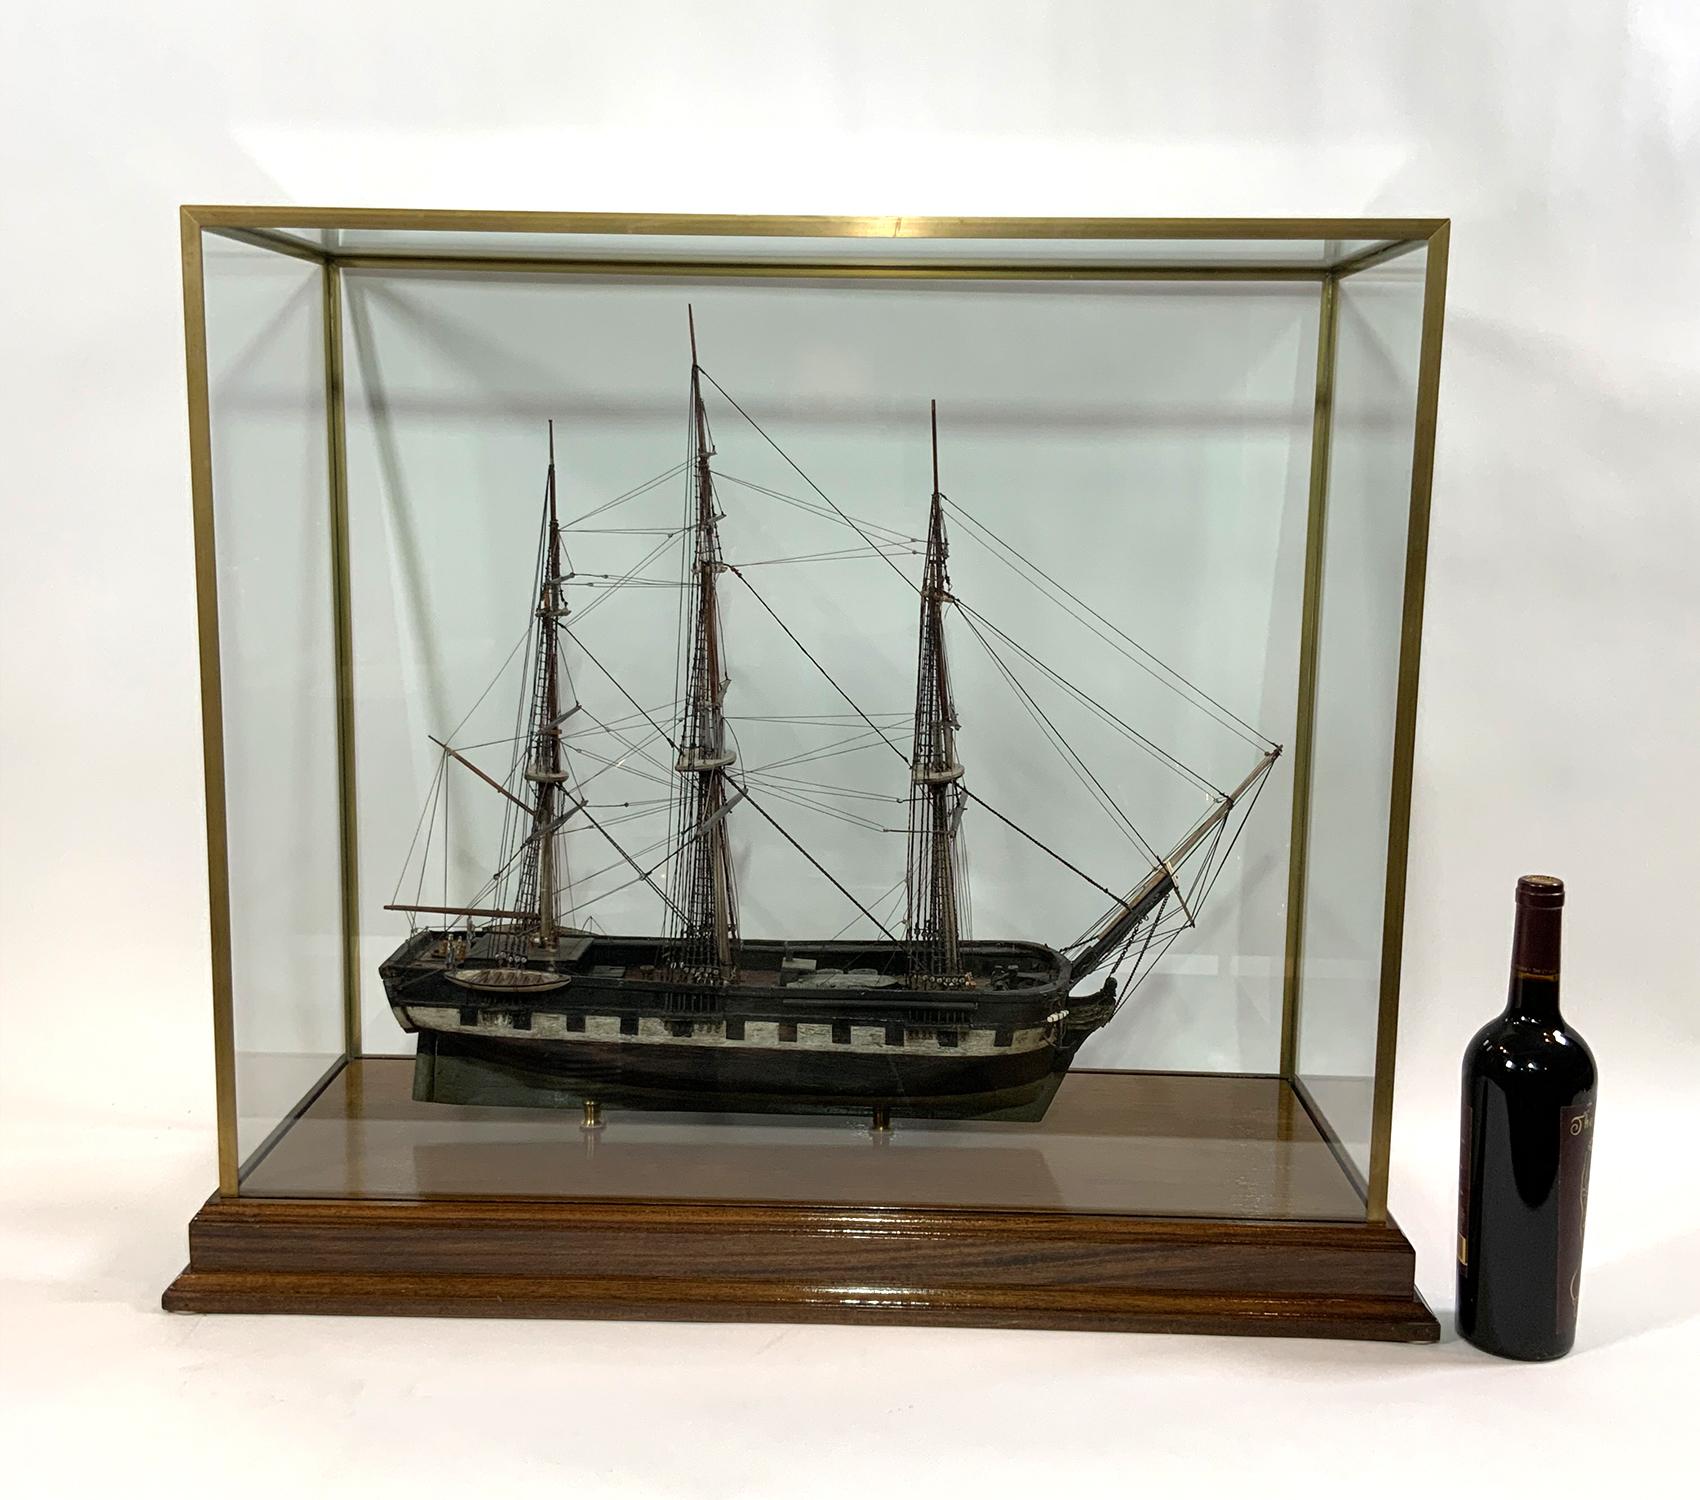 North American Antique Model of the Packet Ship “Lady Gay” of Newbury Mass For Sale